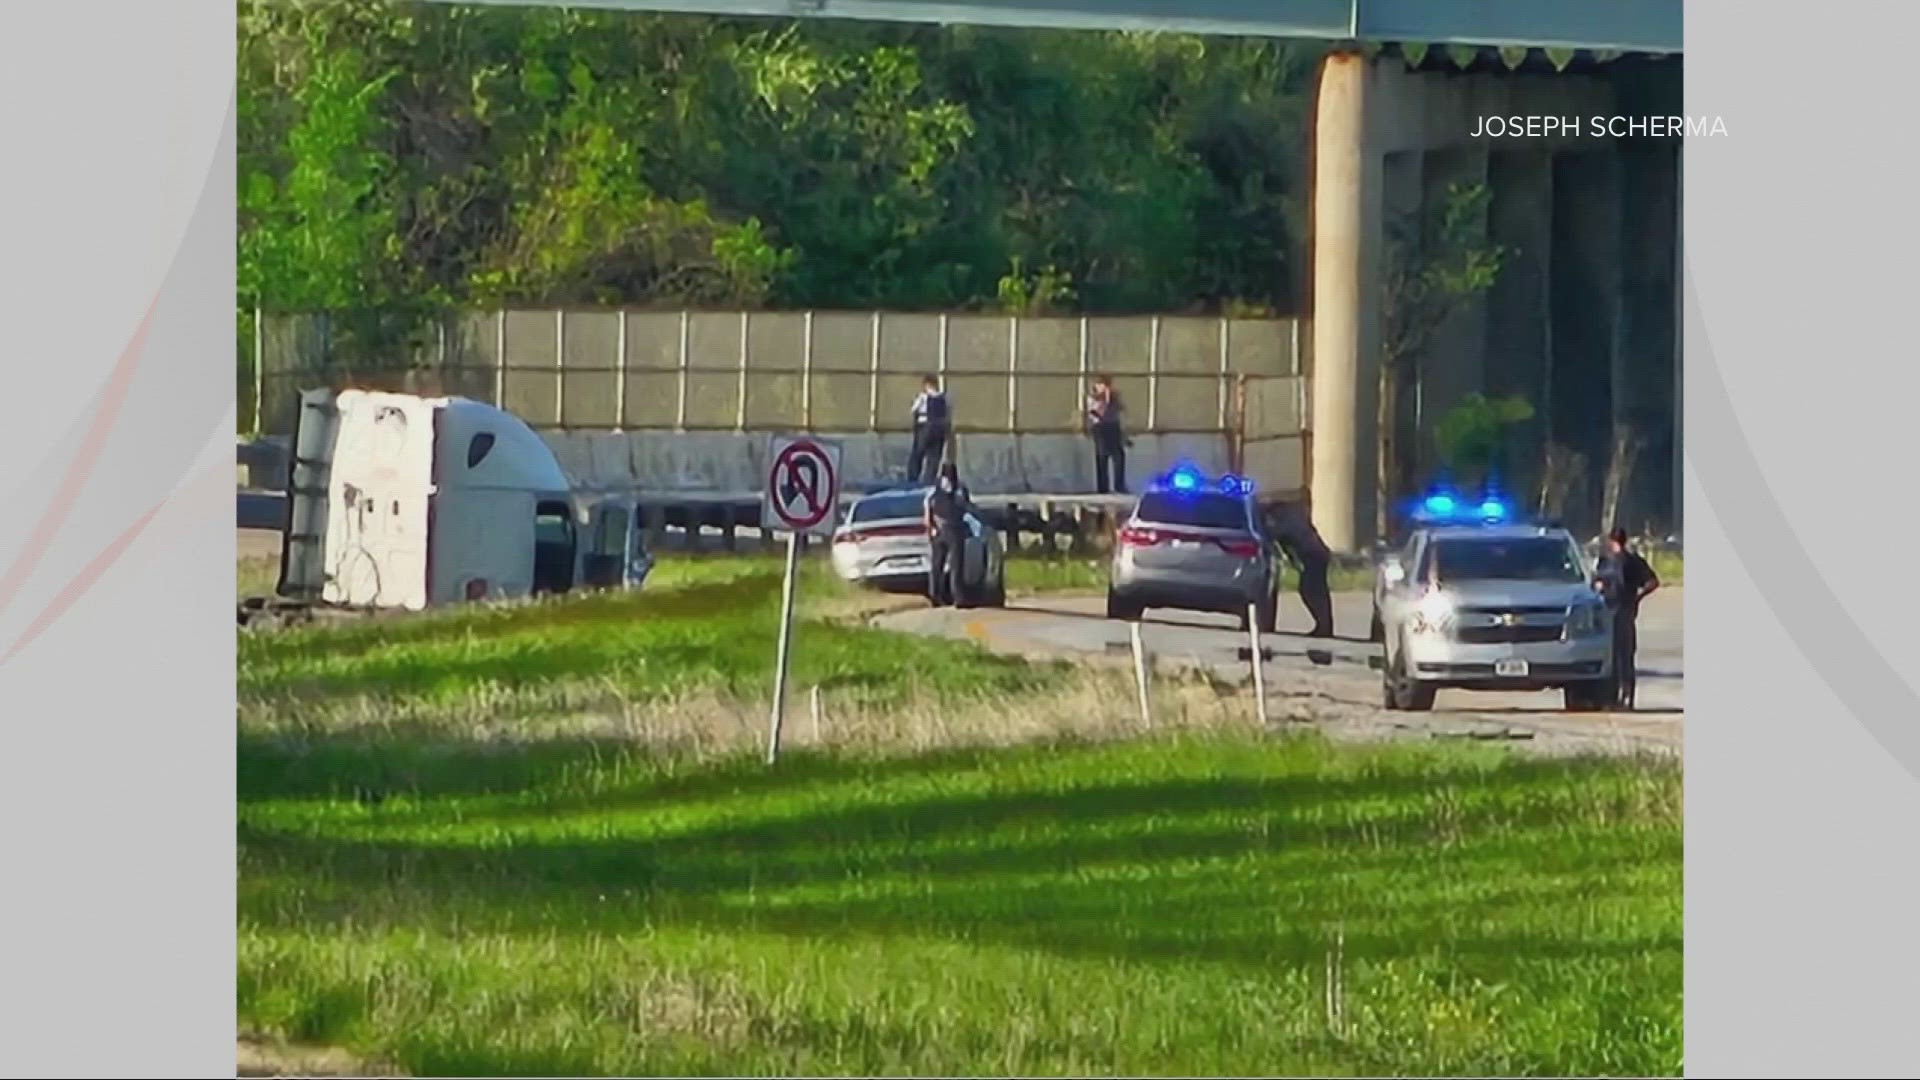 Traffic was backed up for hours as crews attempted to locate the man, who allegedly pulled a gun on a mechanic in Medina County before leading troopers on a chase.